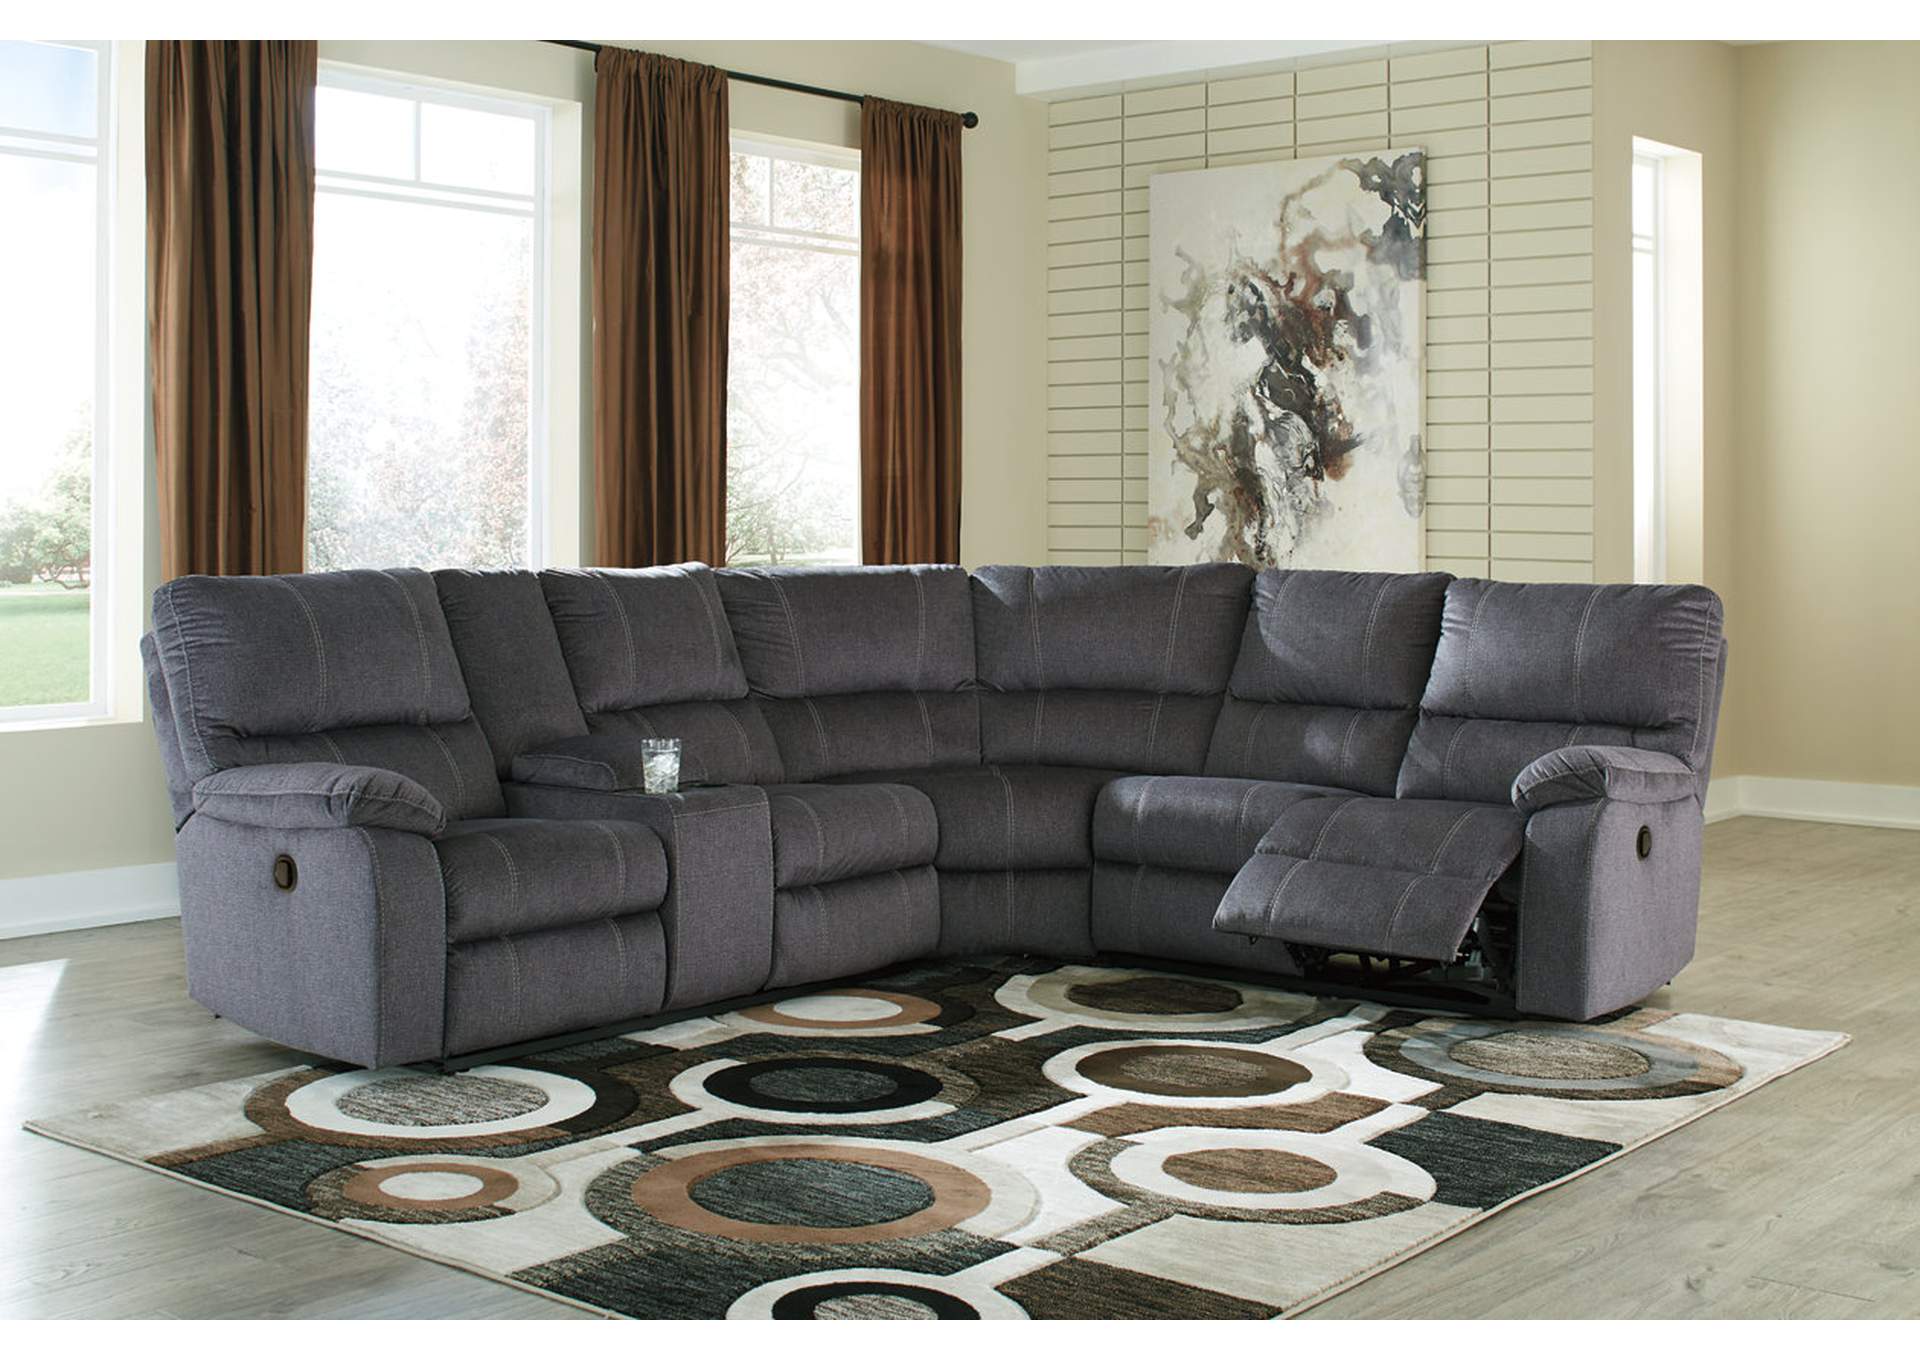 Urbino 3-Piece Reclining Sectional,Signature Design By Ashley